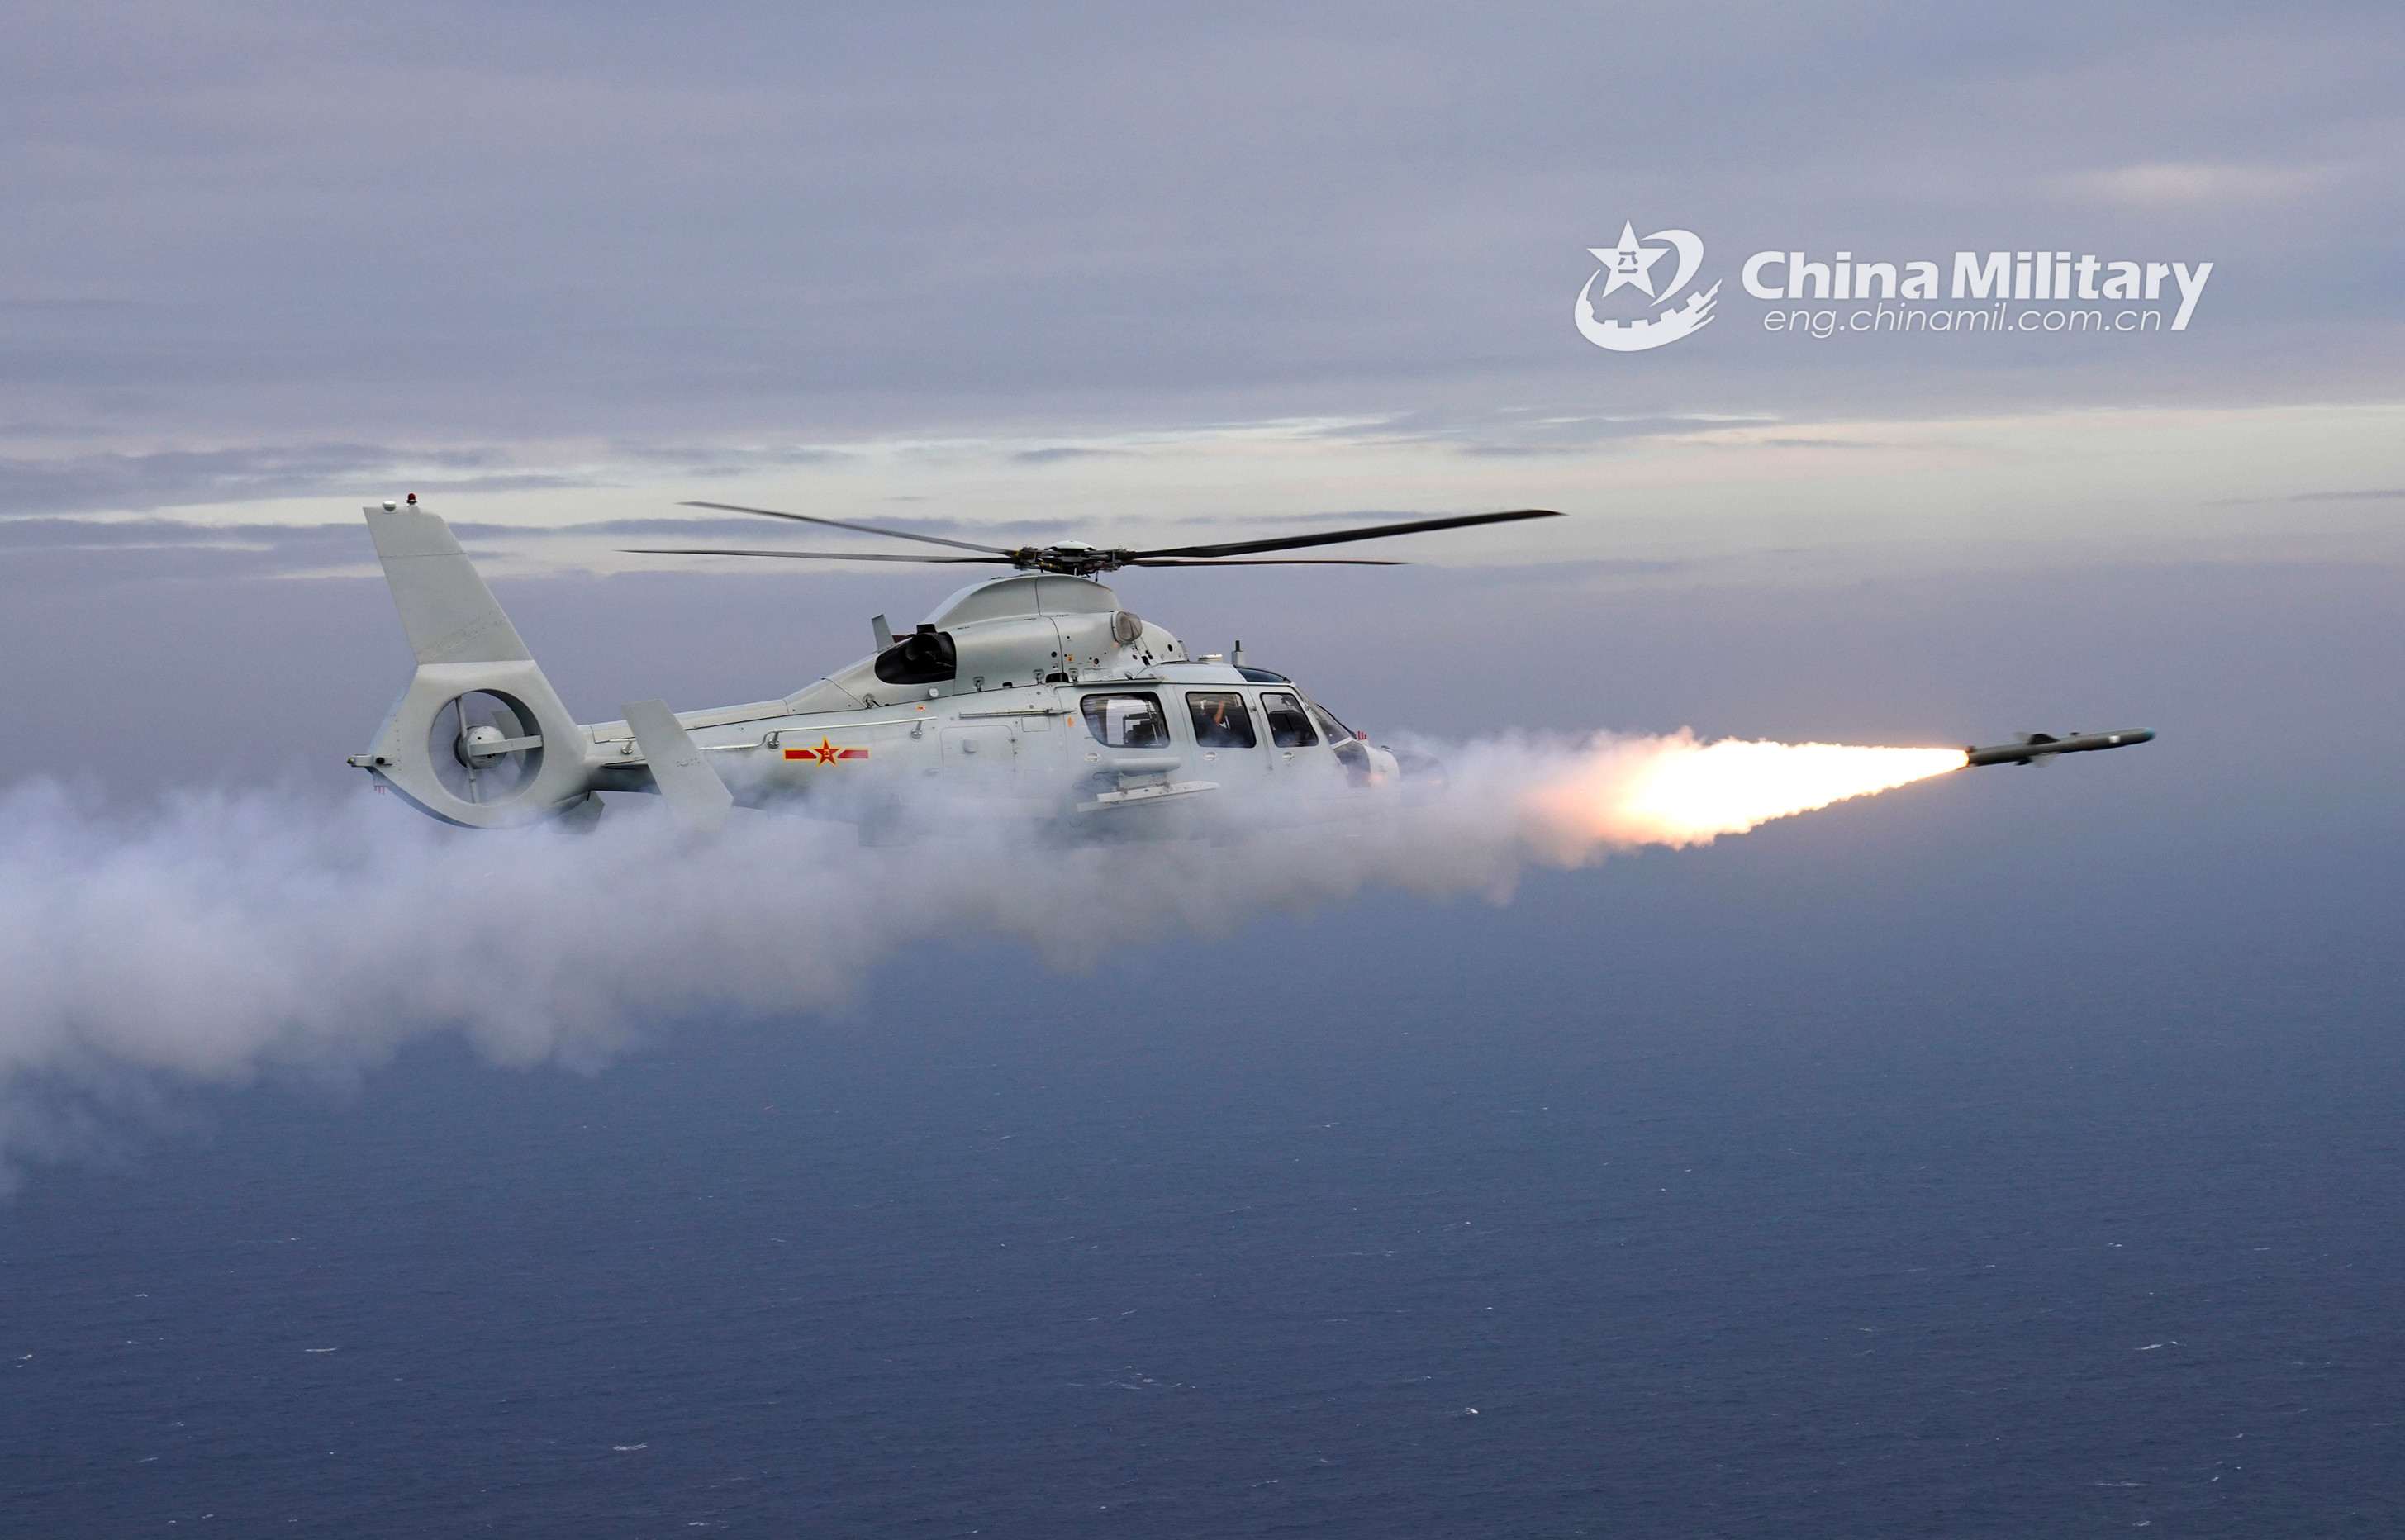 Ship-borne helicopters fire missiles